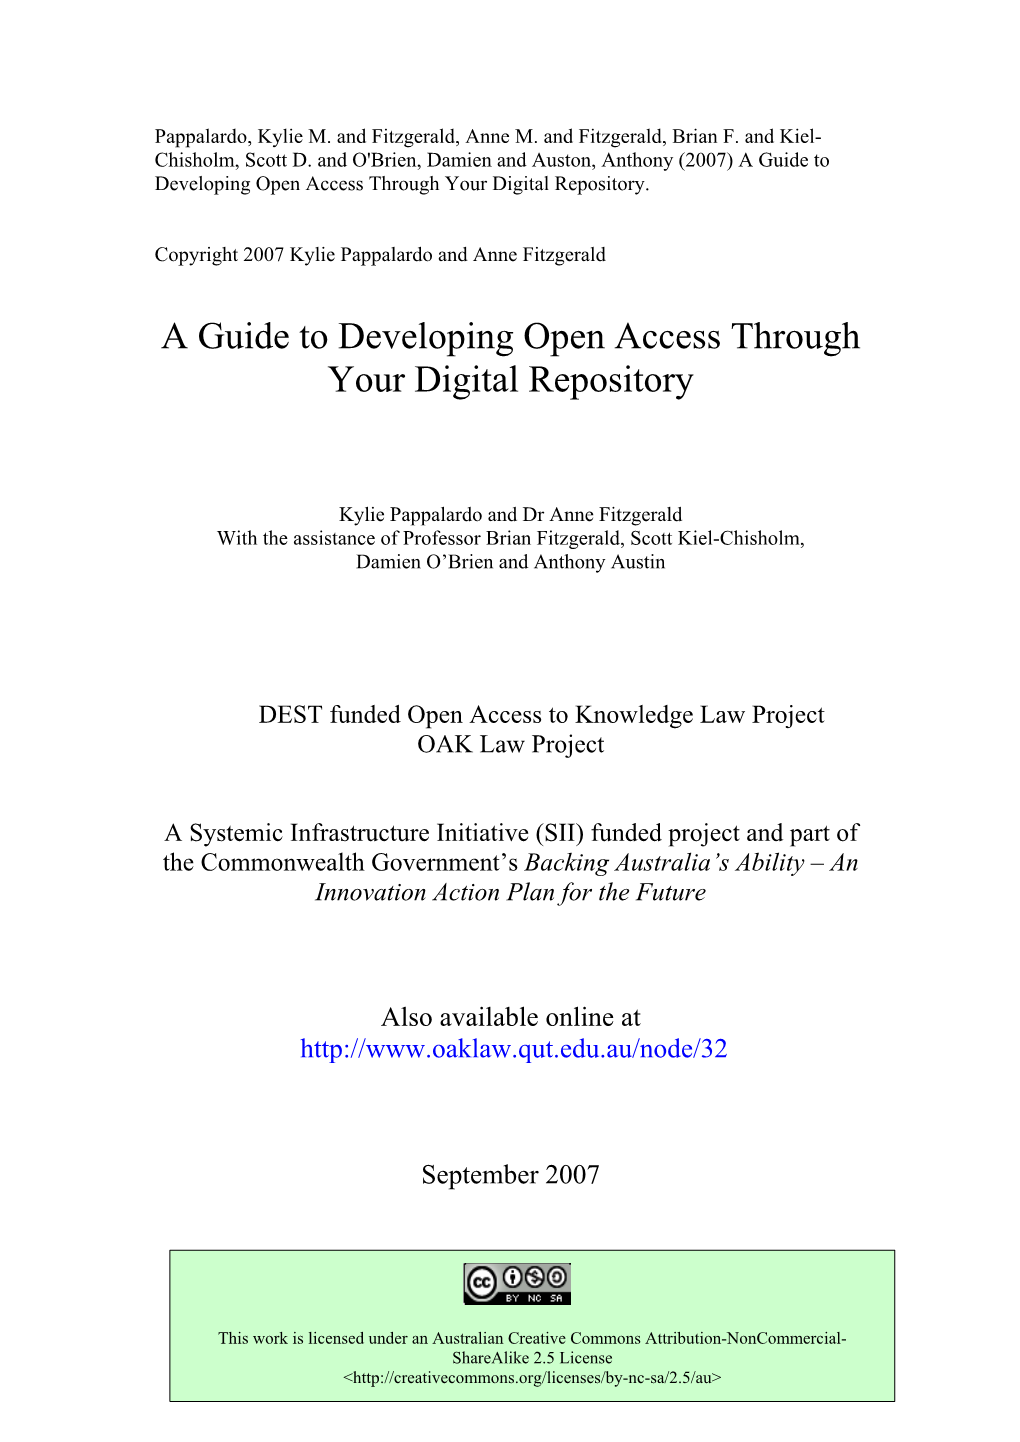 A Guide to Developing Open Access Through Your Digital Repository